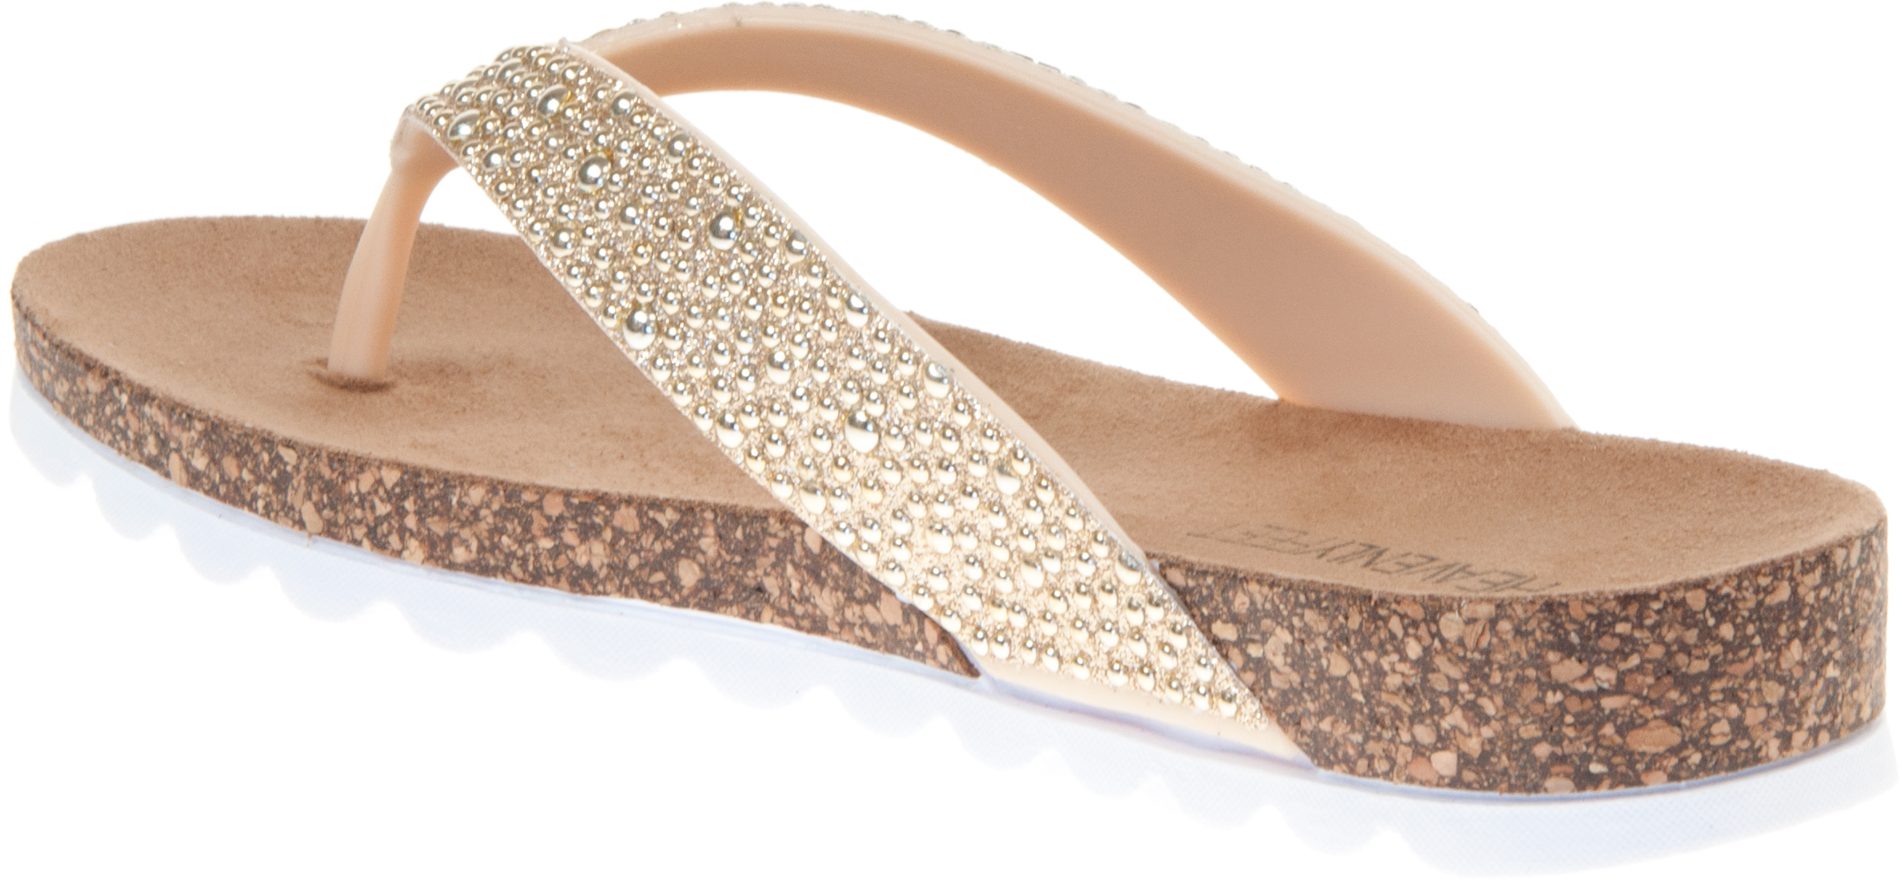 Heavenly Feet Sparkle Gold - Toe Post Sandals - Humphries Shoes